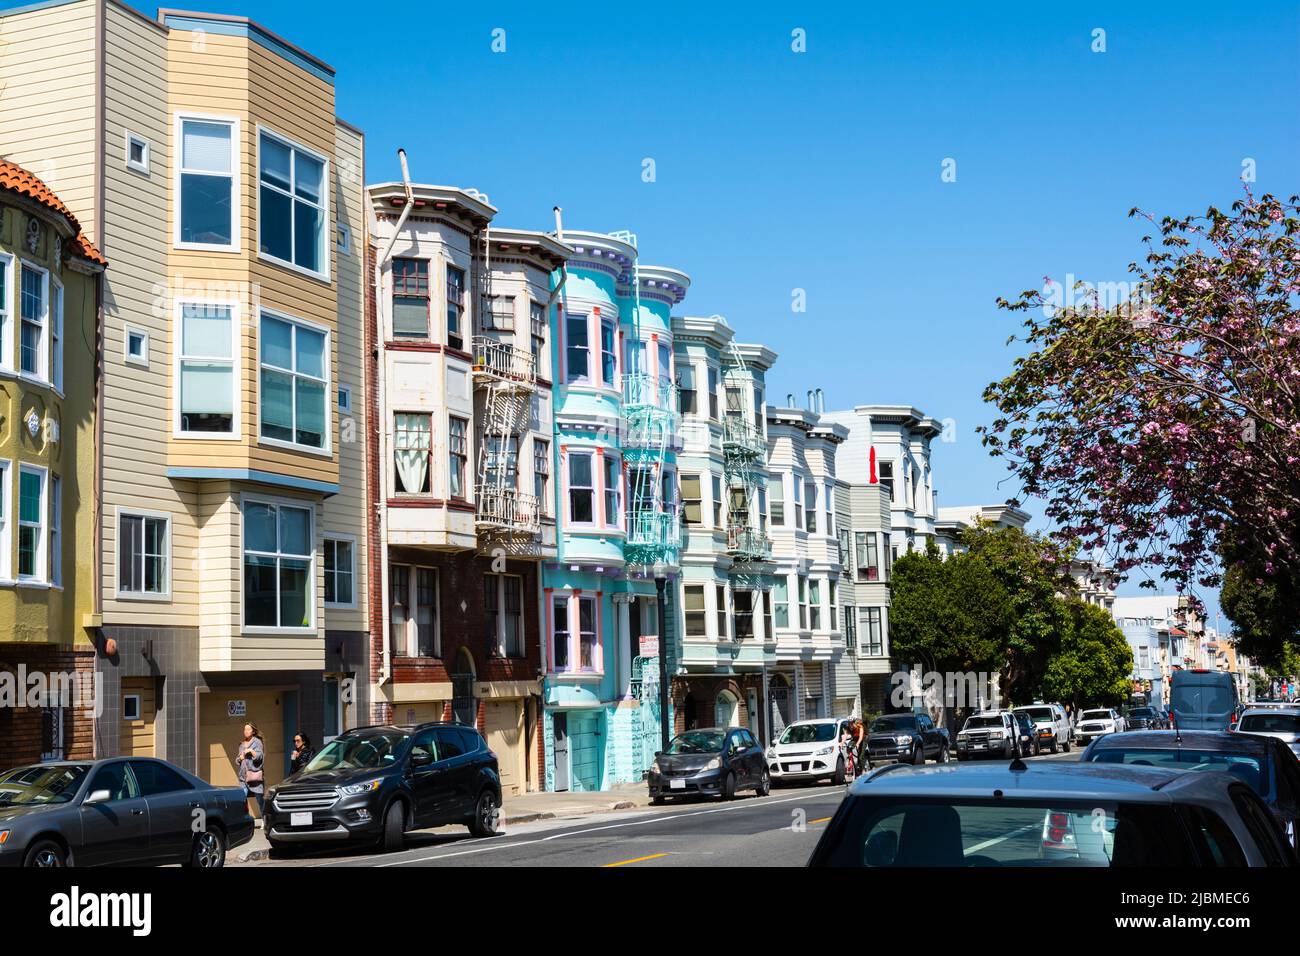 San Francisco,California,USA - April 28, 2022 : Colorful row houses  in 17th street Stock Photo